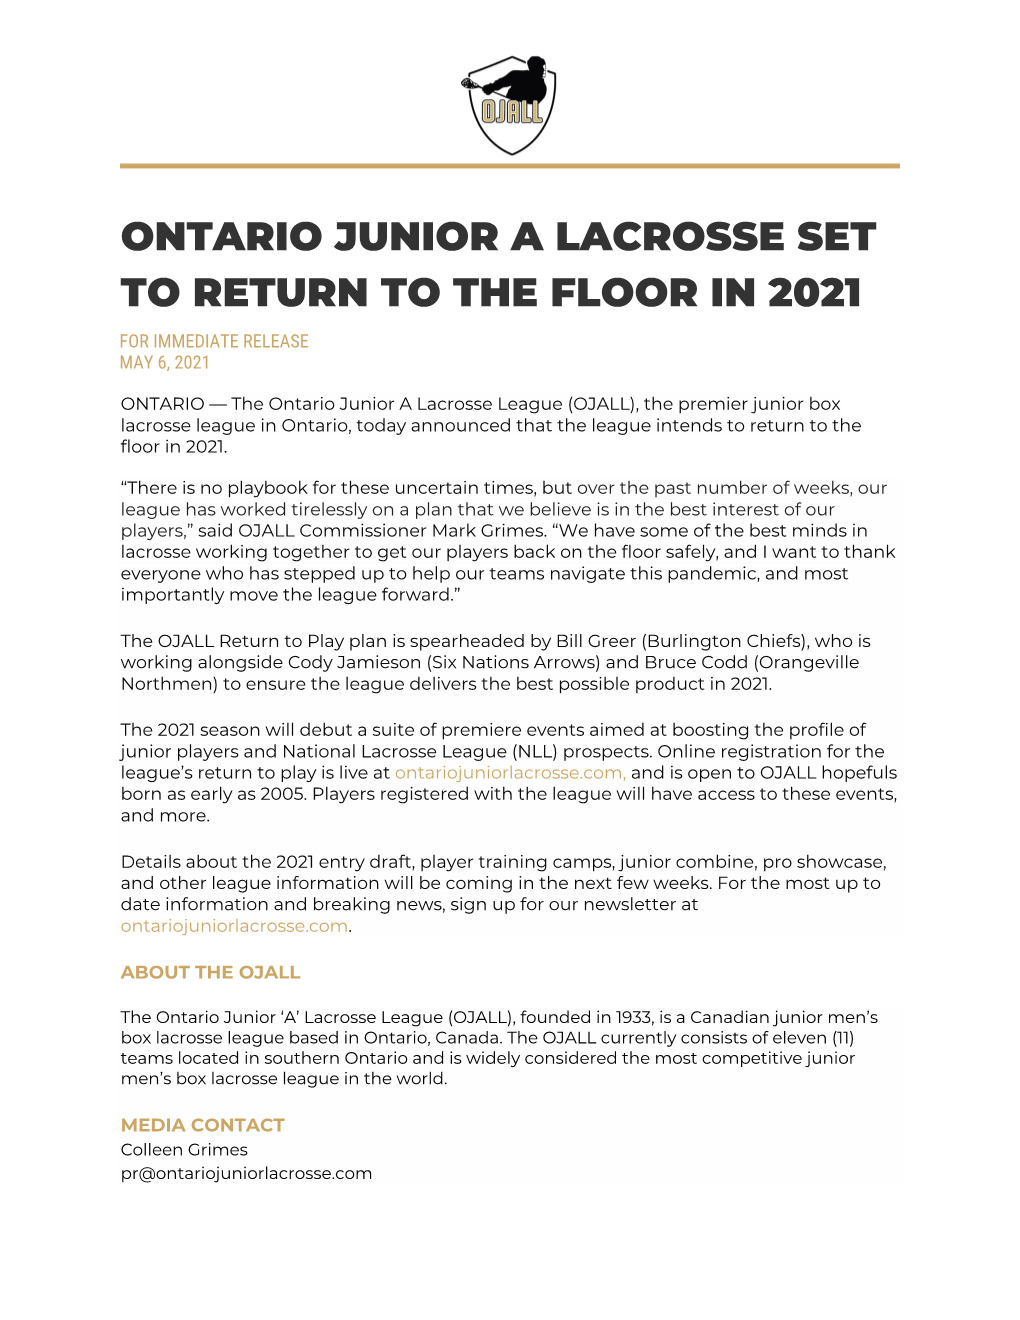 Ontario Junior a Lacrosse Set to Return to the Floor in 2021 for Immediate Release May 6, 2021